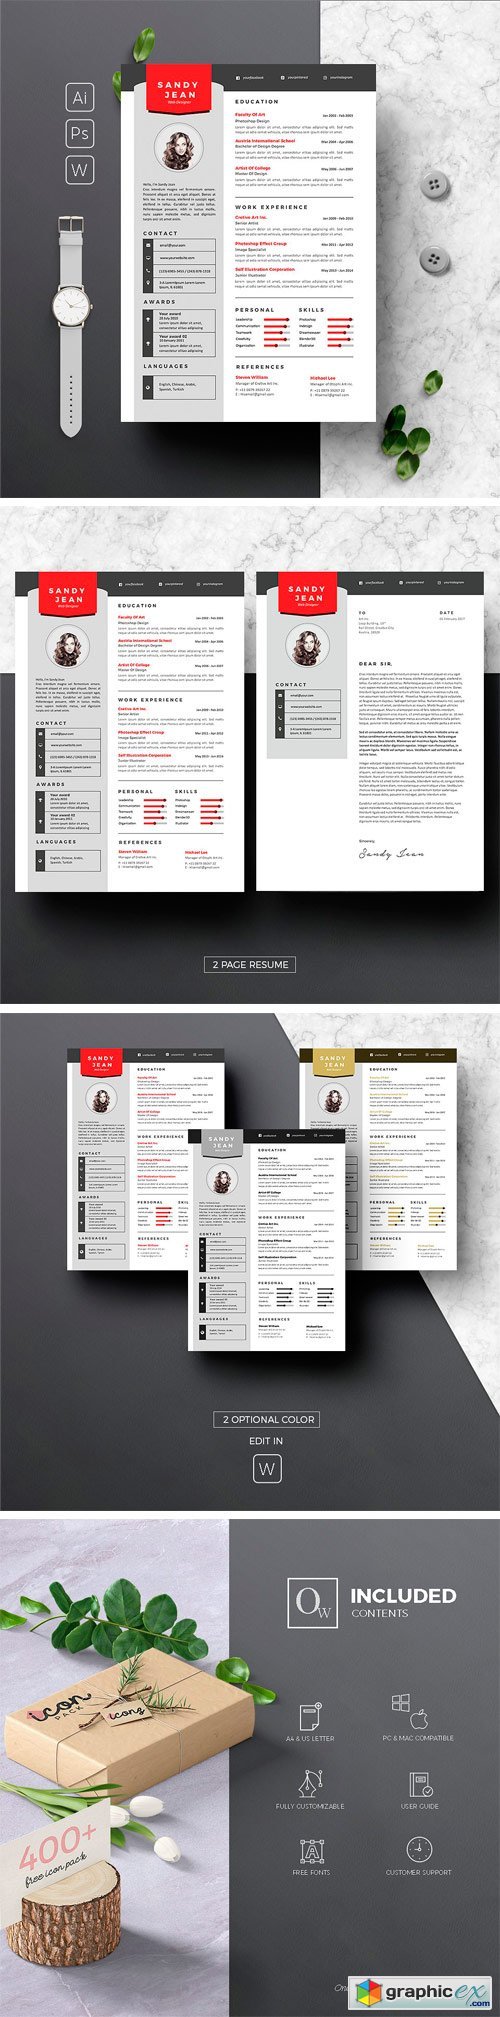 Clean Resume & Cover Letter